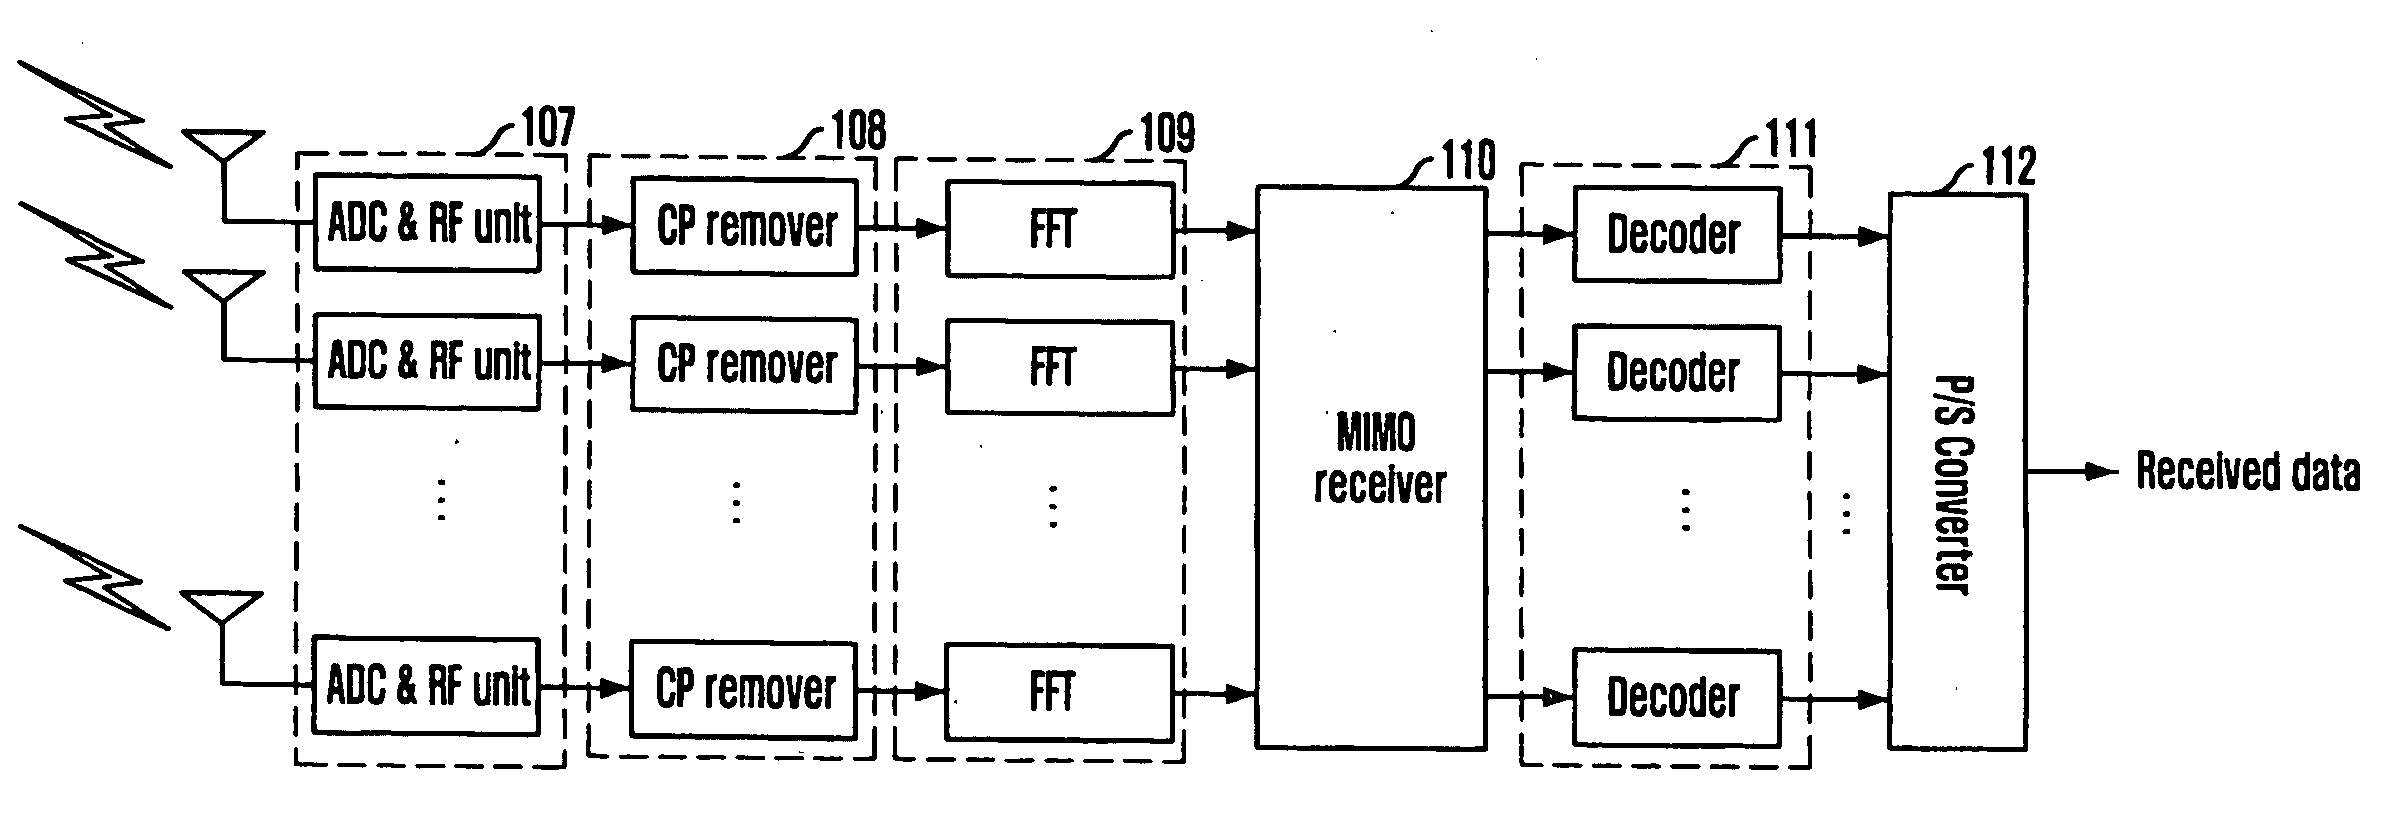 Multi-dimensional detector for receiver of MIMO system